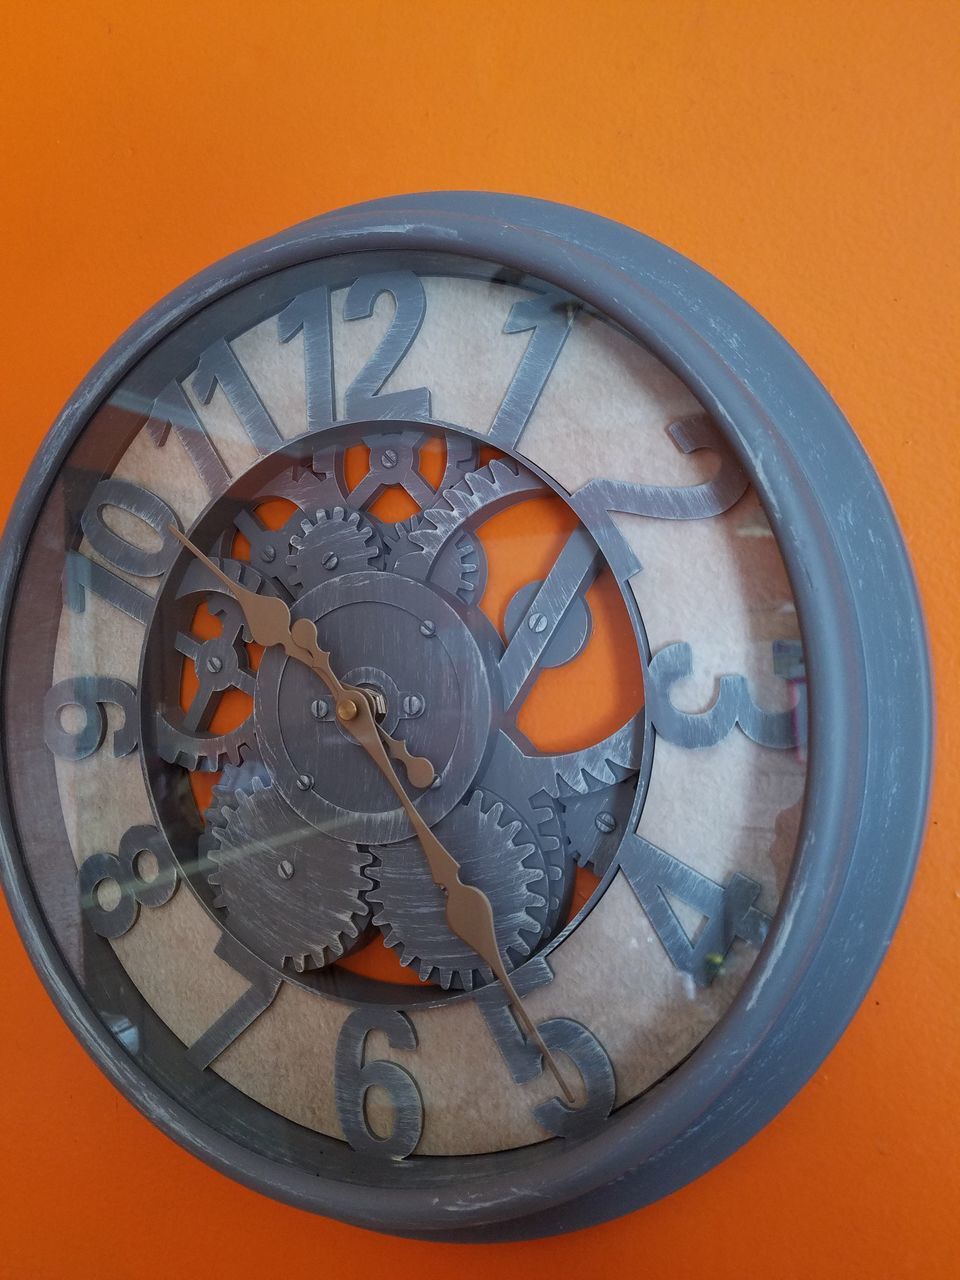 DIRECTLY ABOVE SHOT OF CLOCK AND ORANGE ON WALL